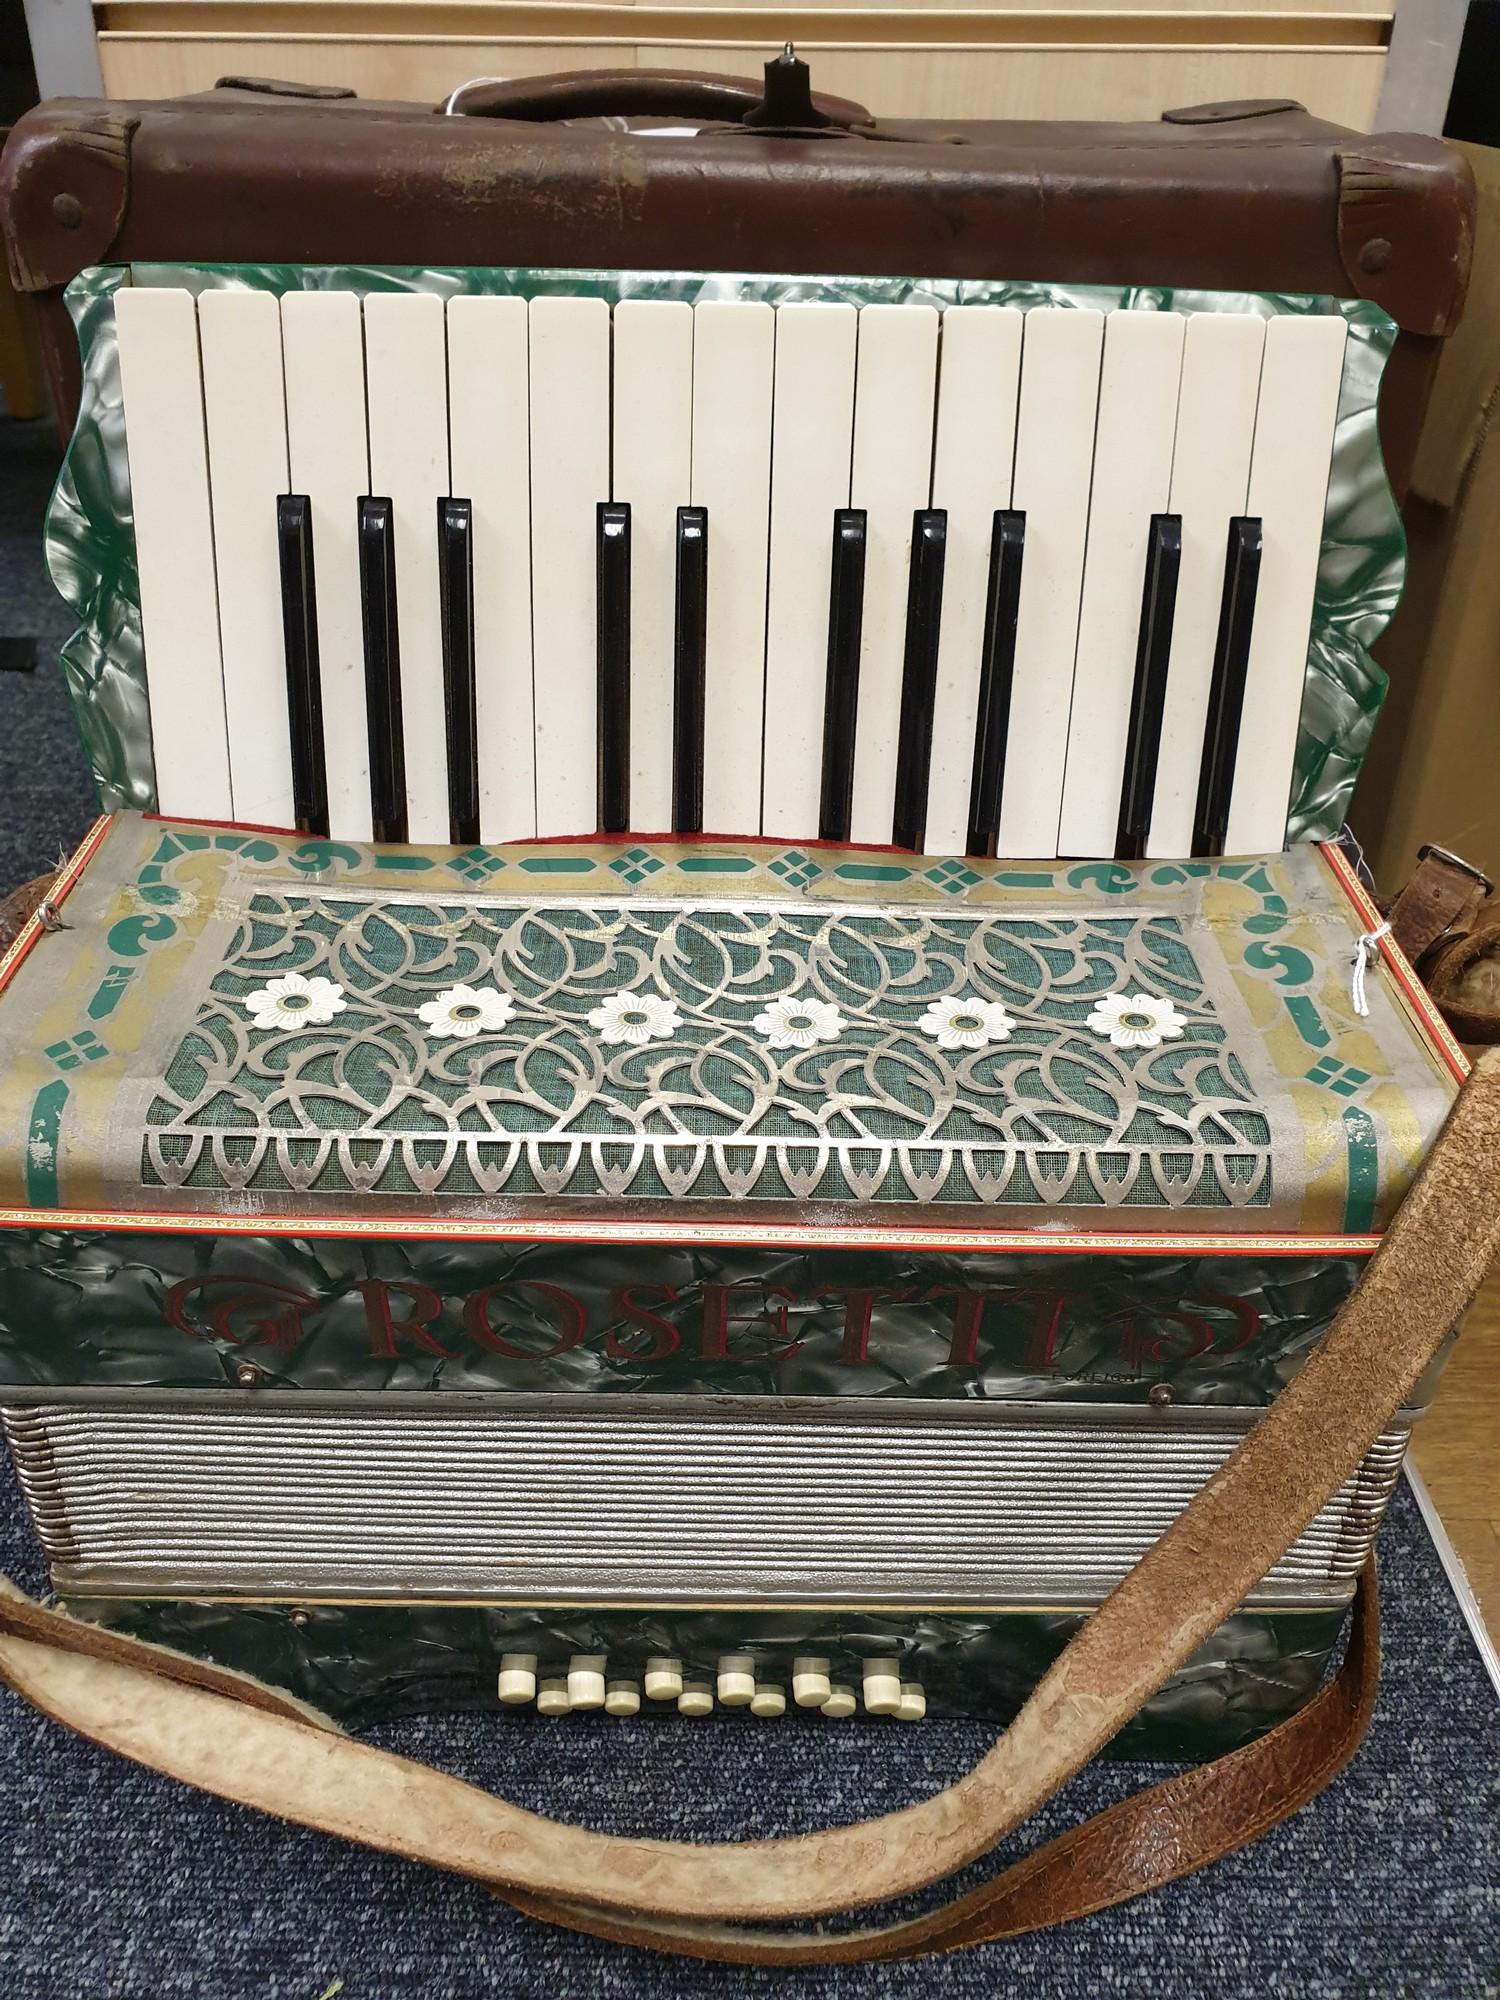 A Vintage 'Rosetts' Accordian, Bellows in good working order but one key needs a new spring, comes - Image 5 of 9